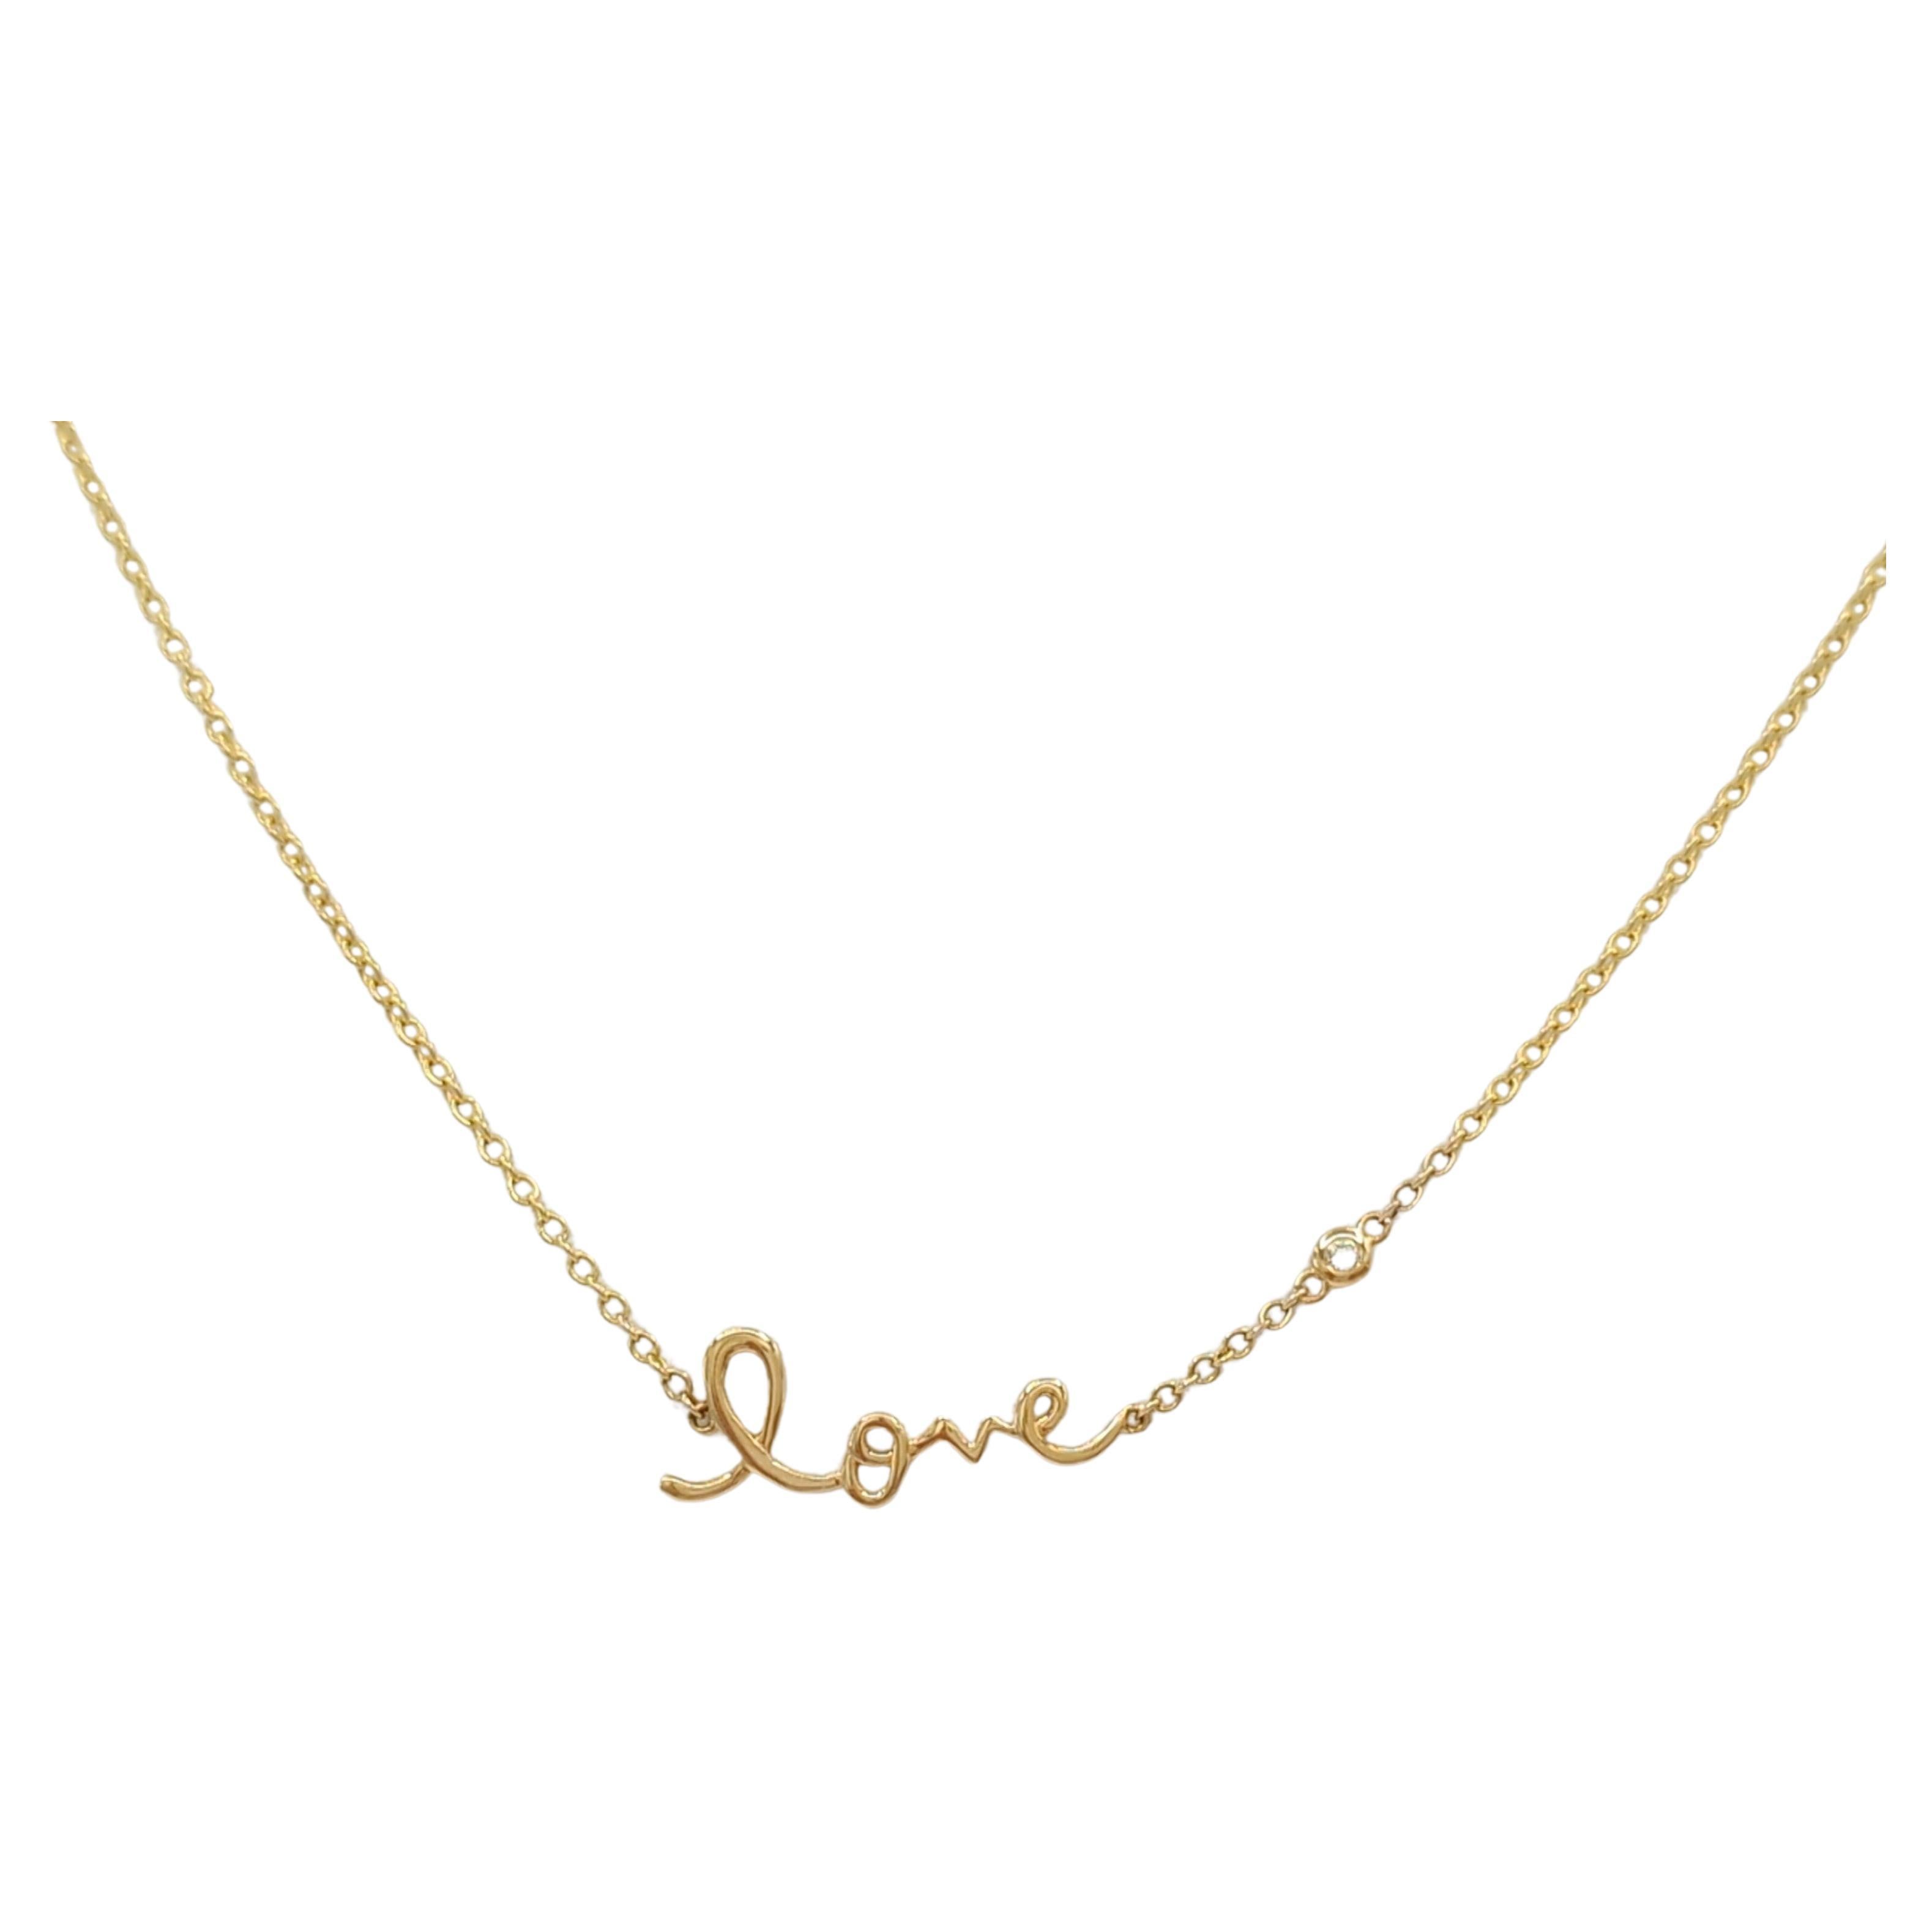 White Diamond and 14k Yellow Gold "Love" Necklace